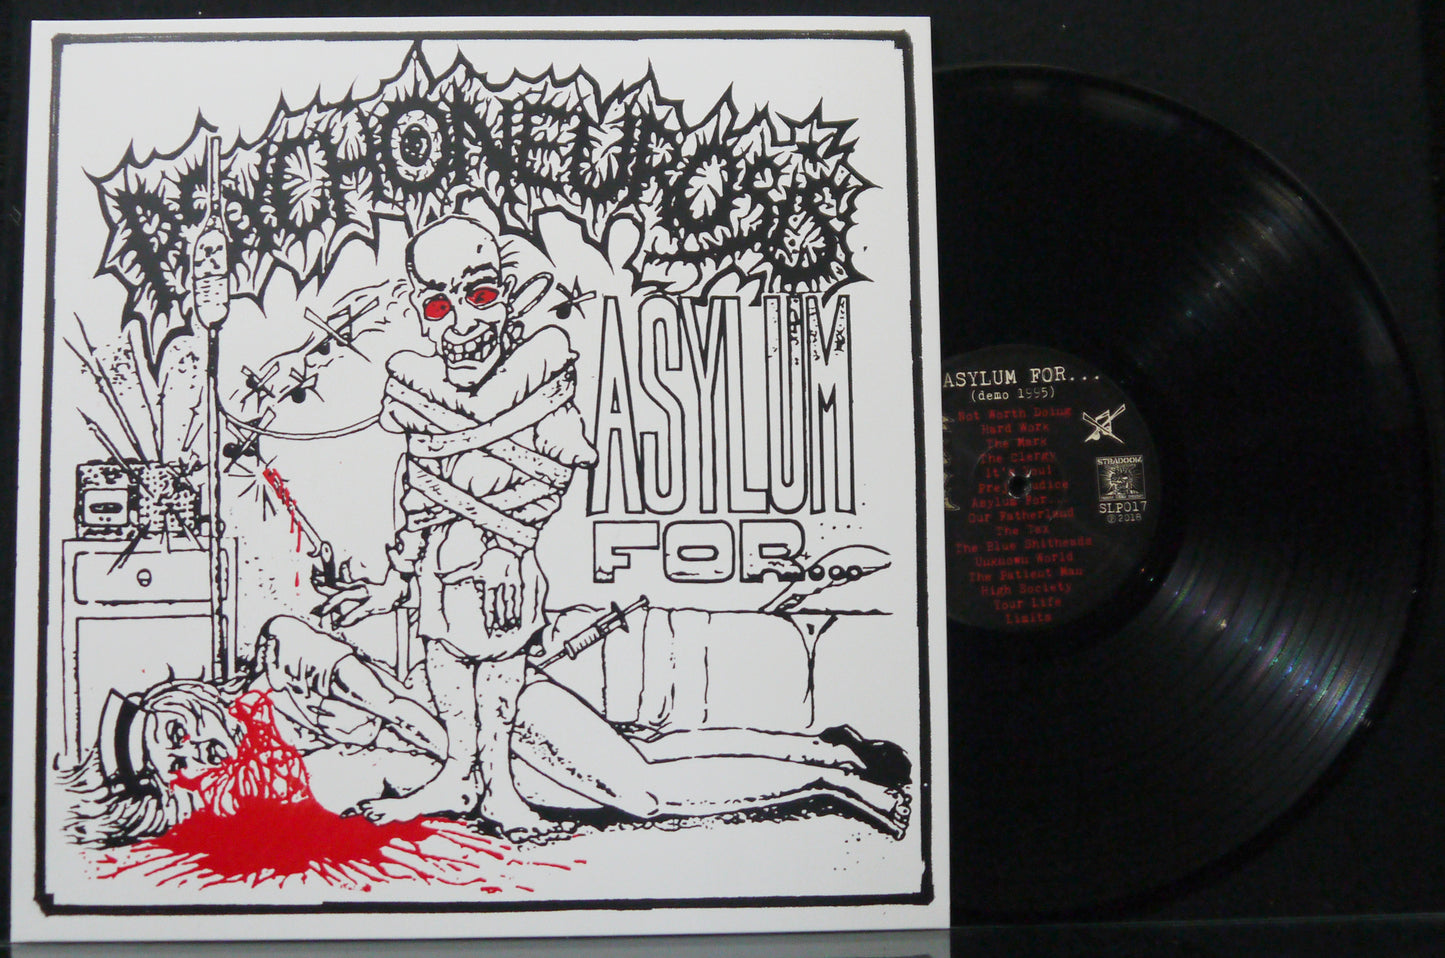 PSYCHONEUROSIS - Asylom For.../This Is Also Man... 12"